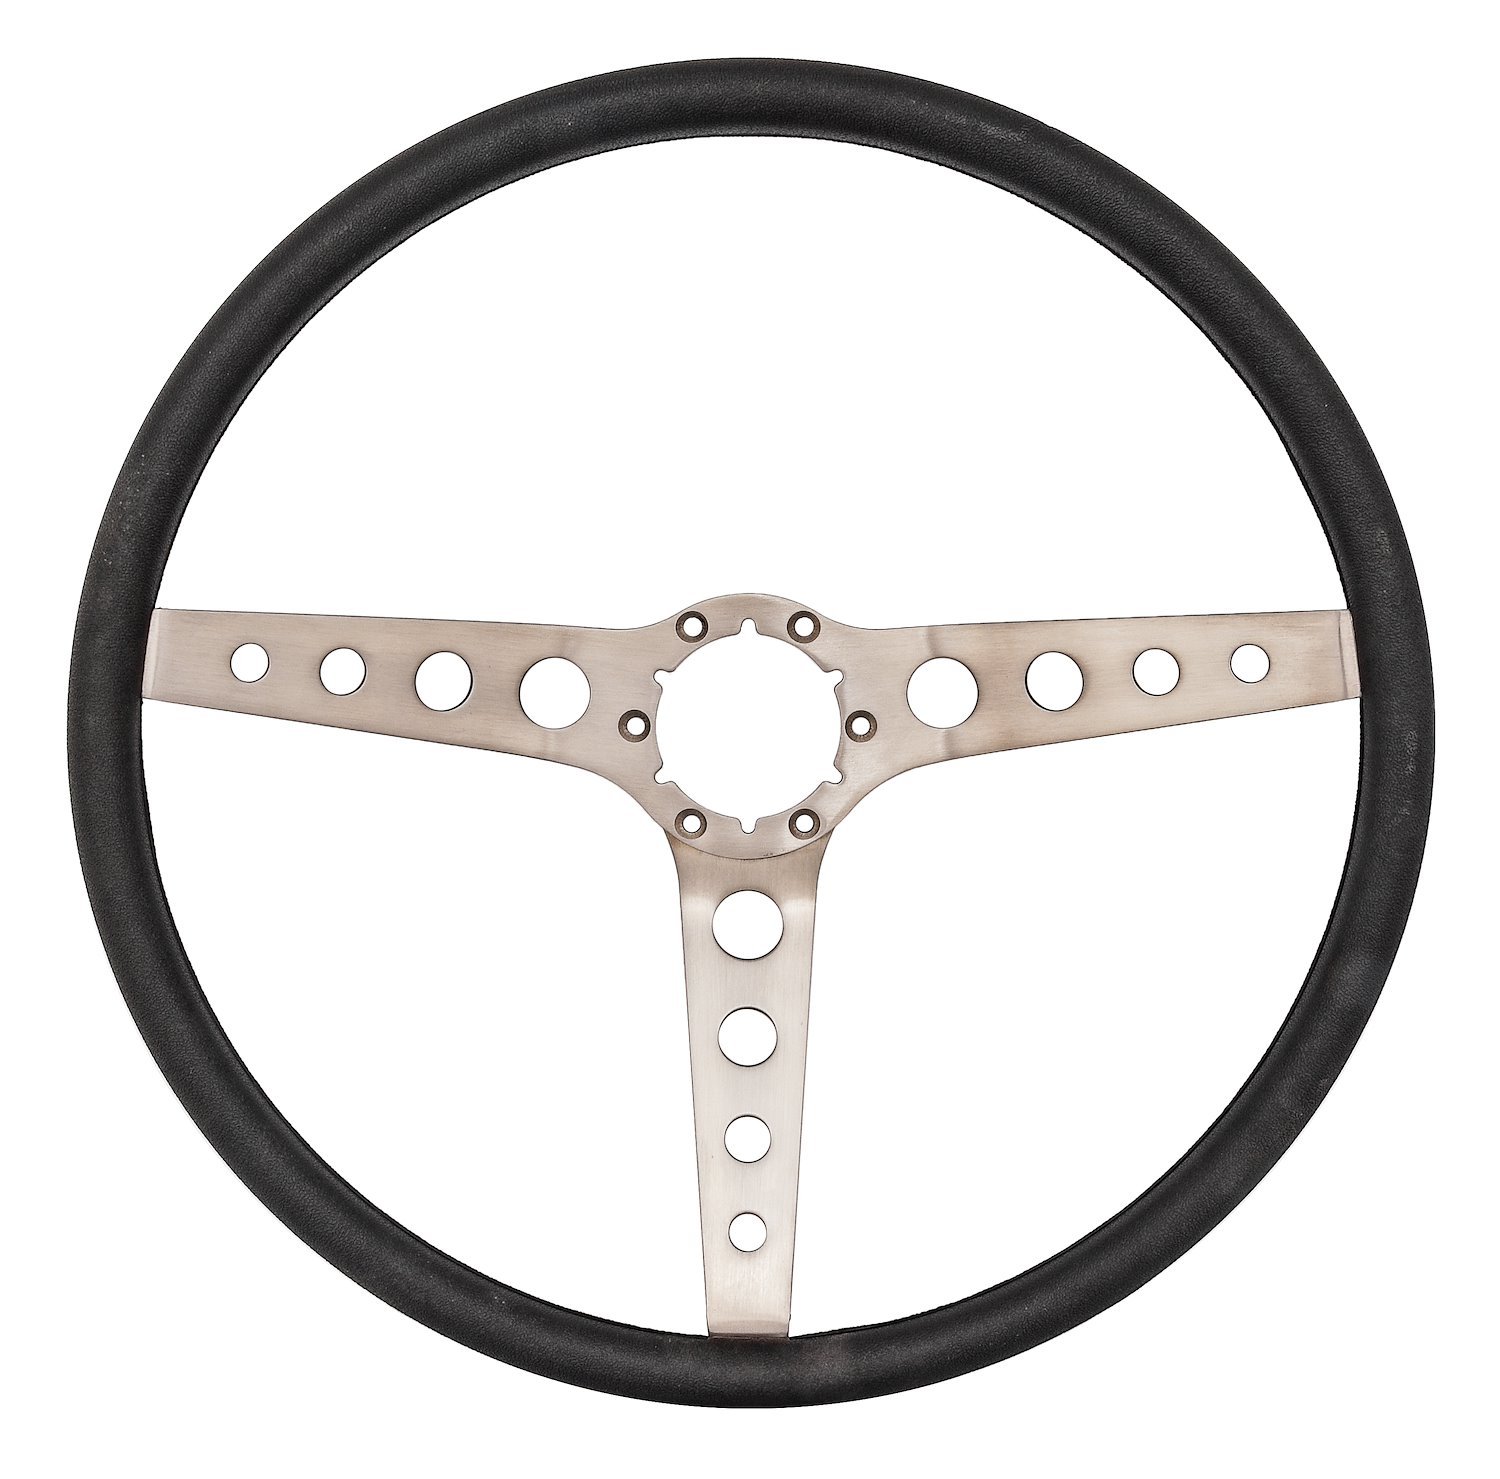 3-Spoke Comfort Grip Steering Wheel with Round Holes Fits Select 1960-1975 Chevy and GMC Trucks, 1969-1972 GM Cars [Black Grip]